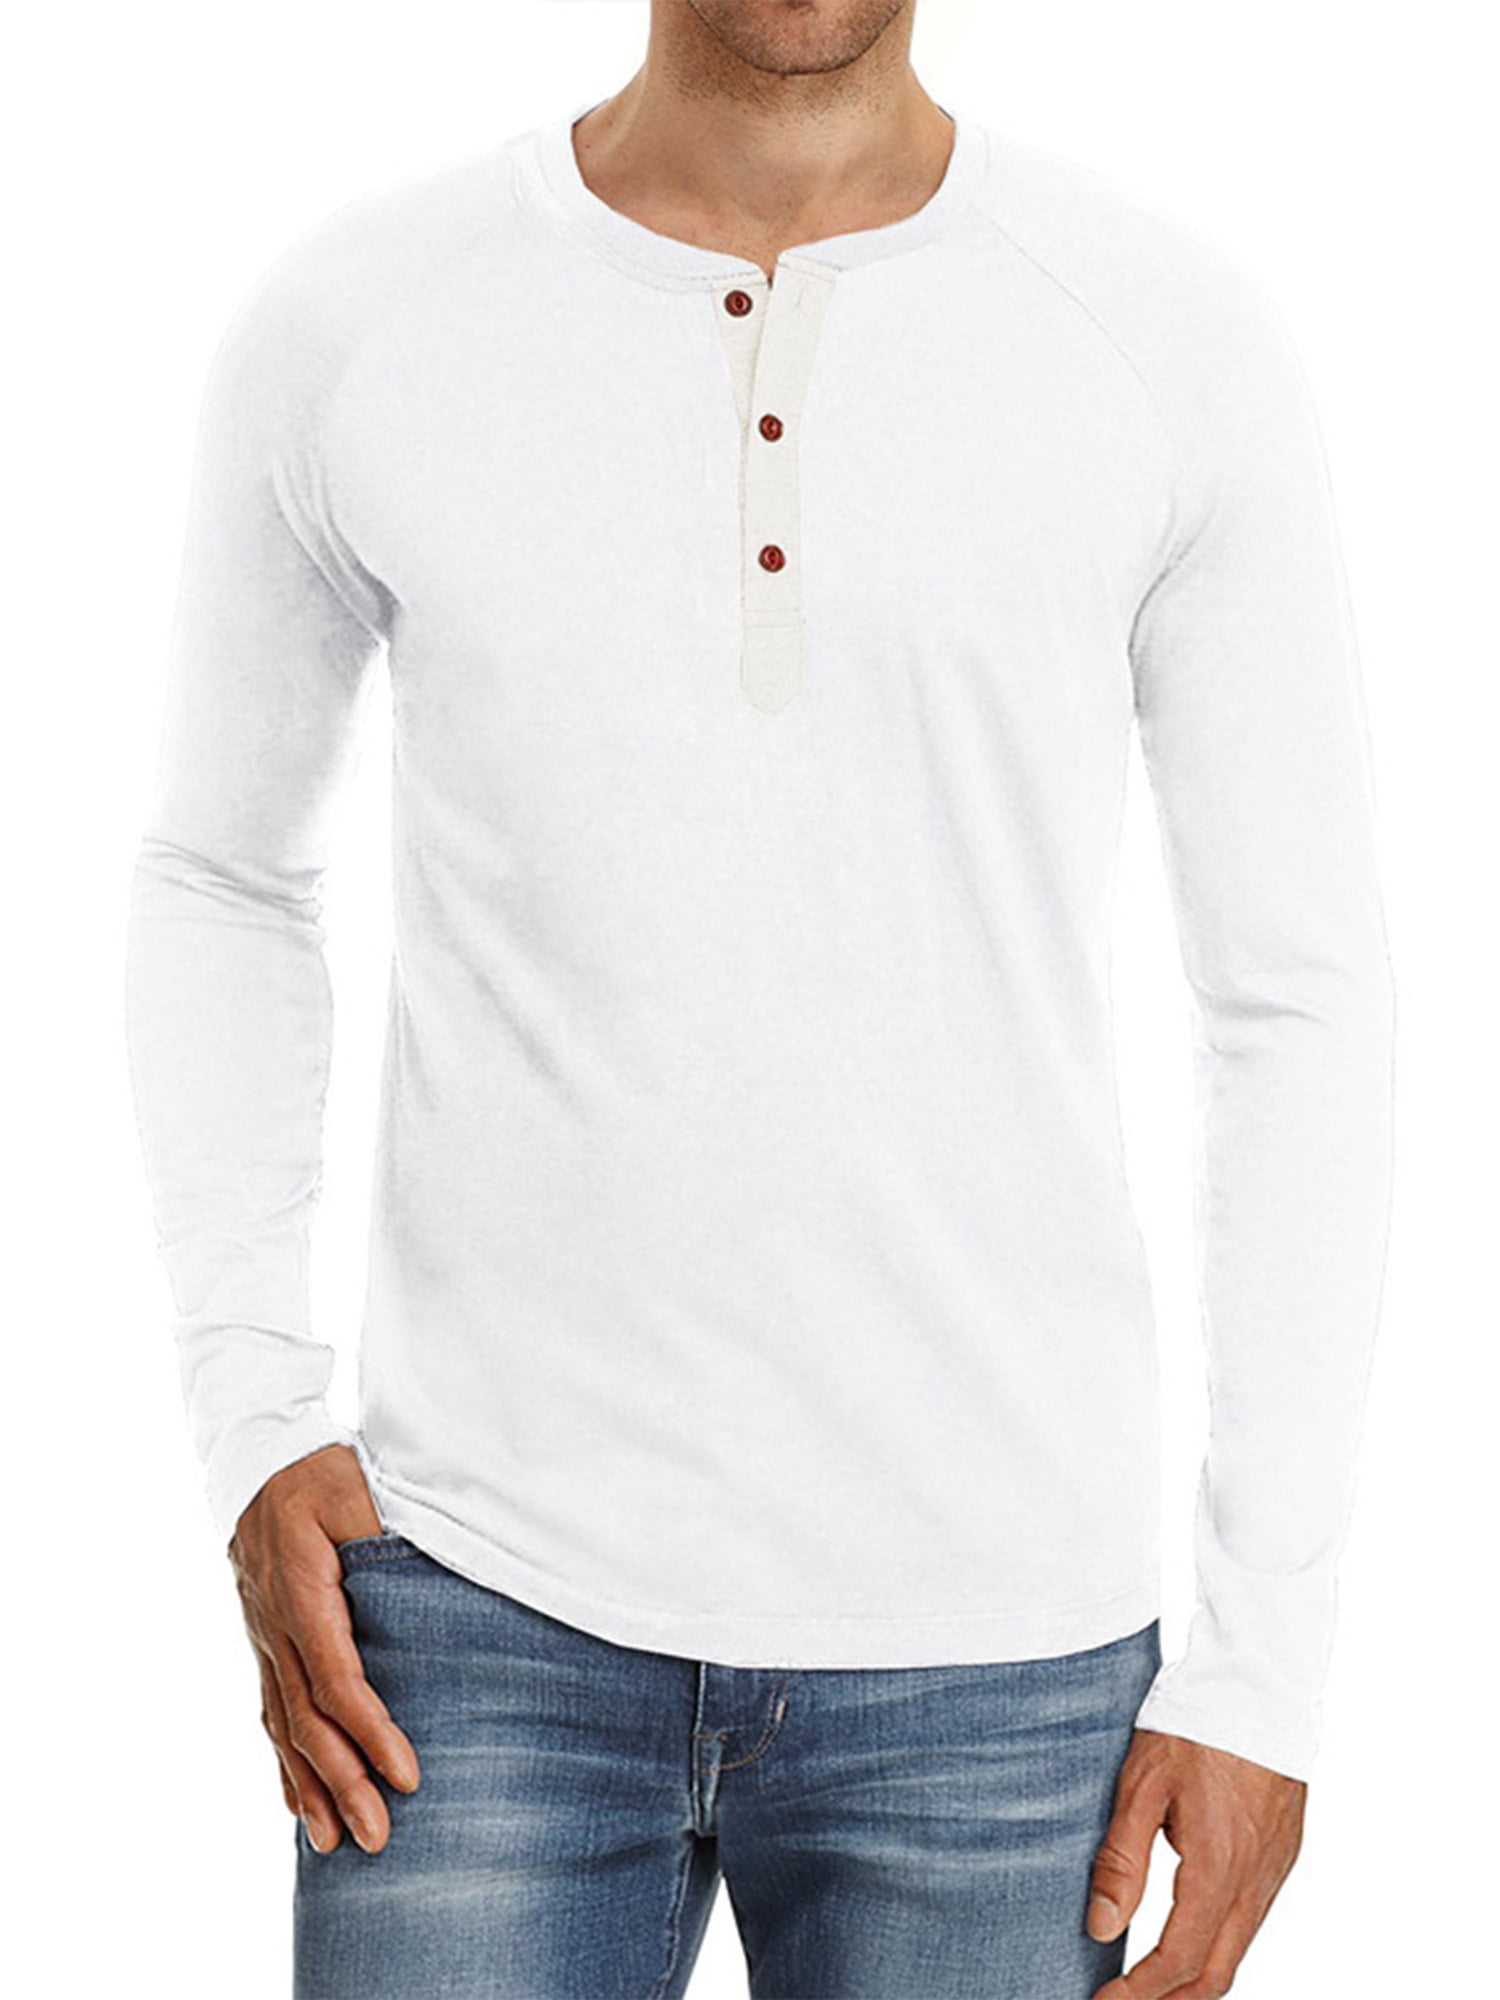 Men V Neck Henley Tops Long Sleeve Sweater T Shirts Solid Tops Casual Undershirt